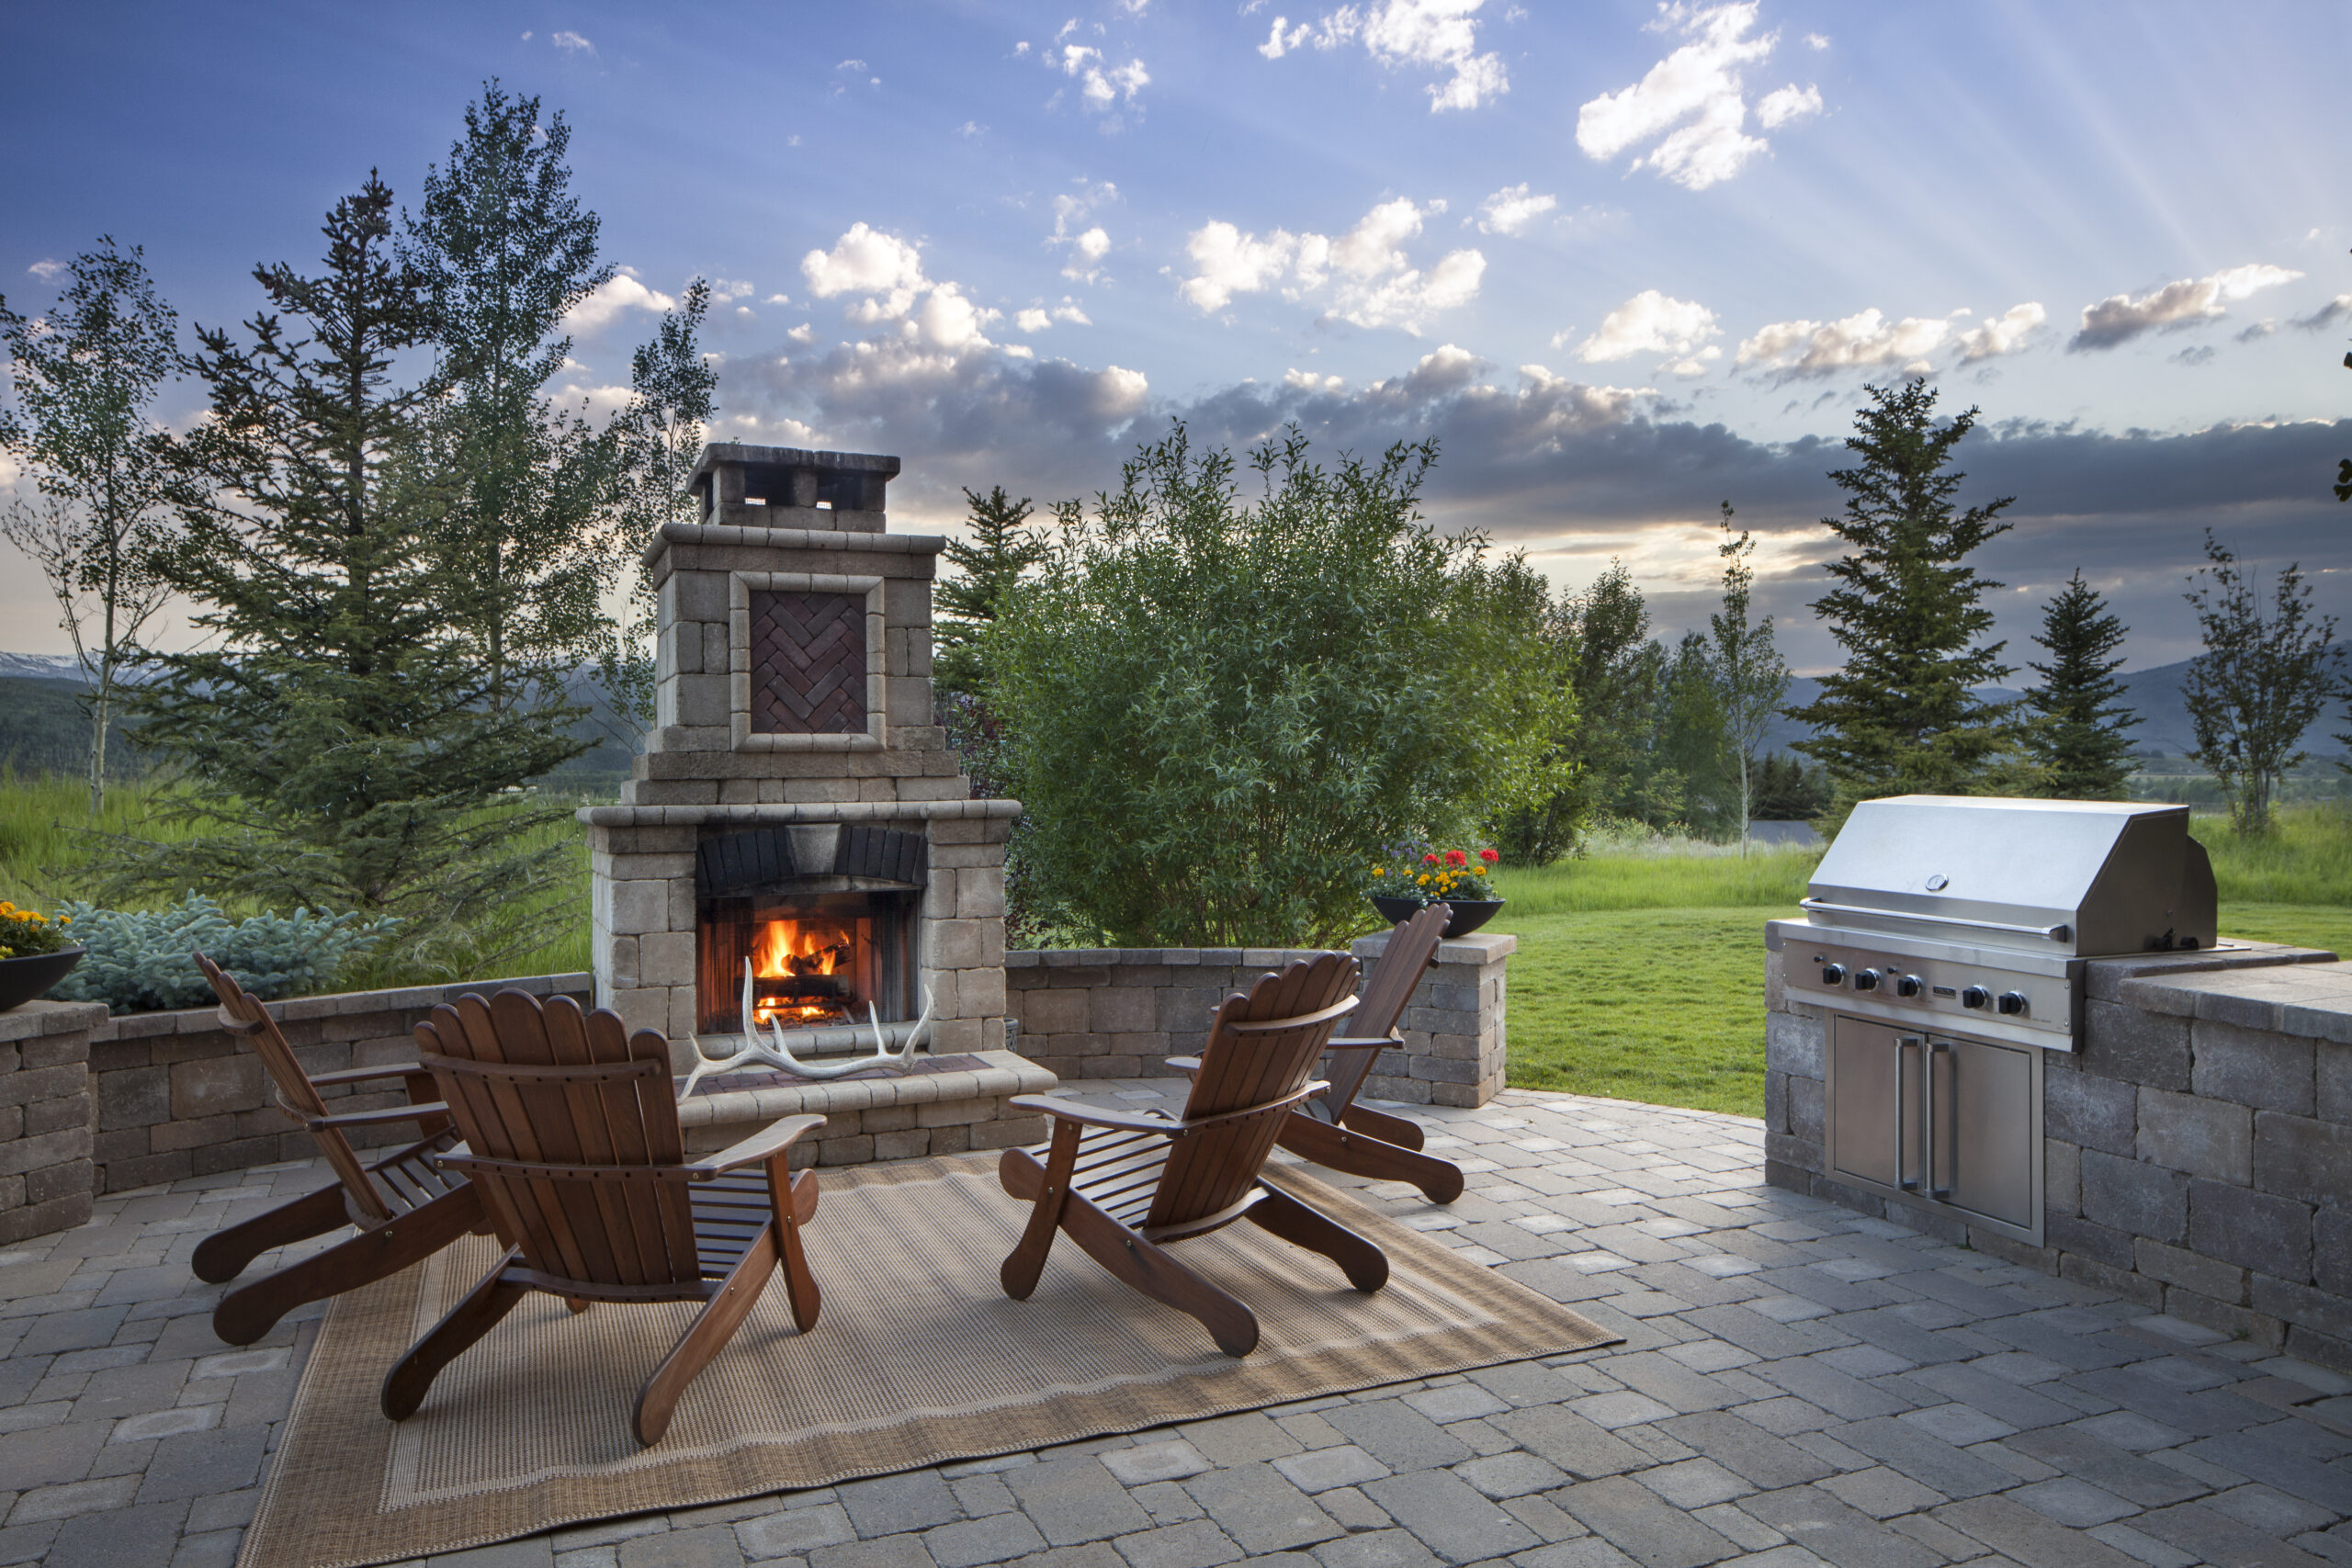 Get a Head Start on Your Travel Plans to Jackson Hole